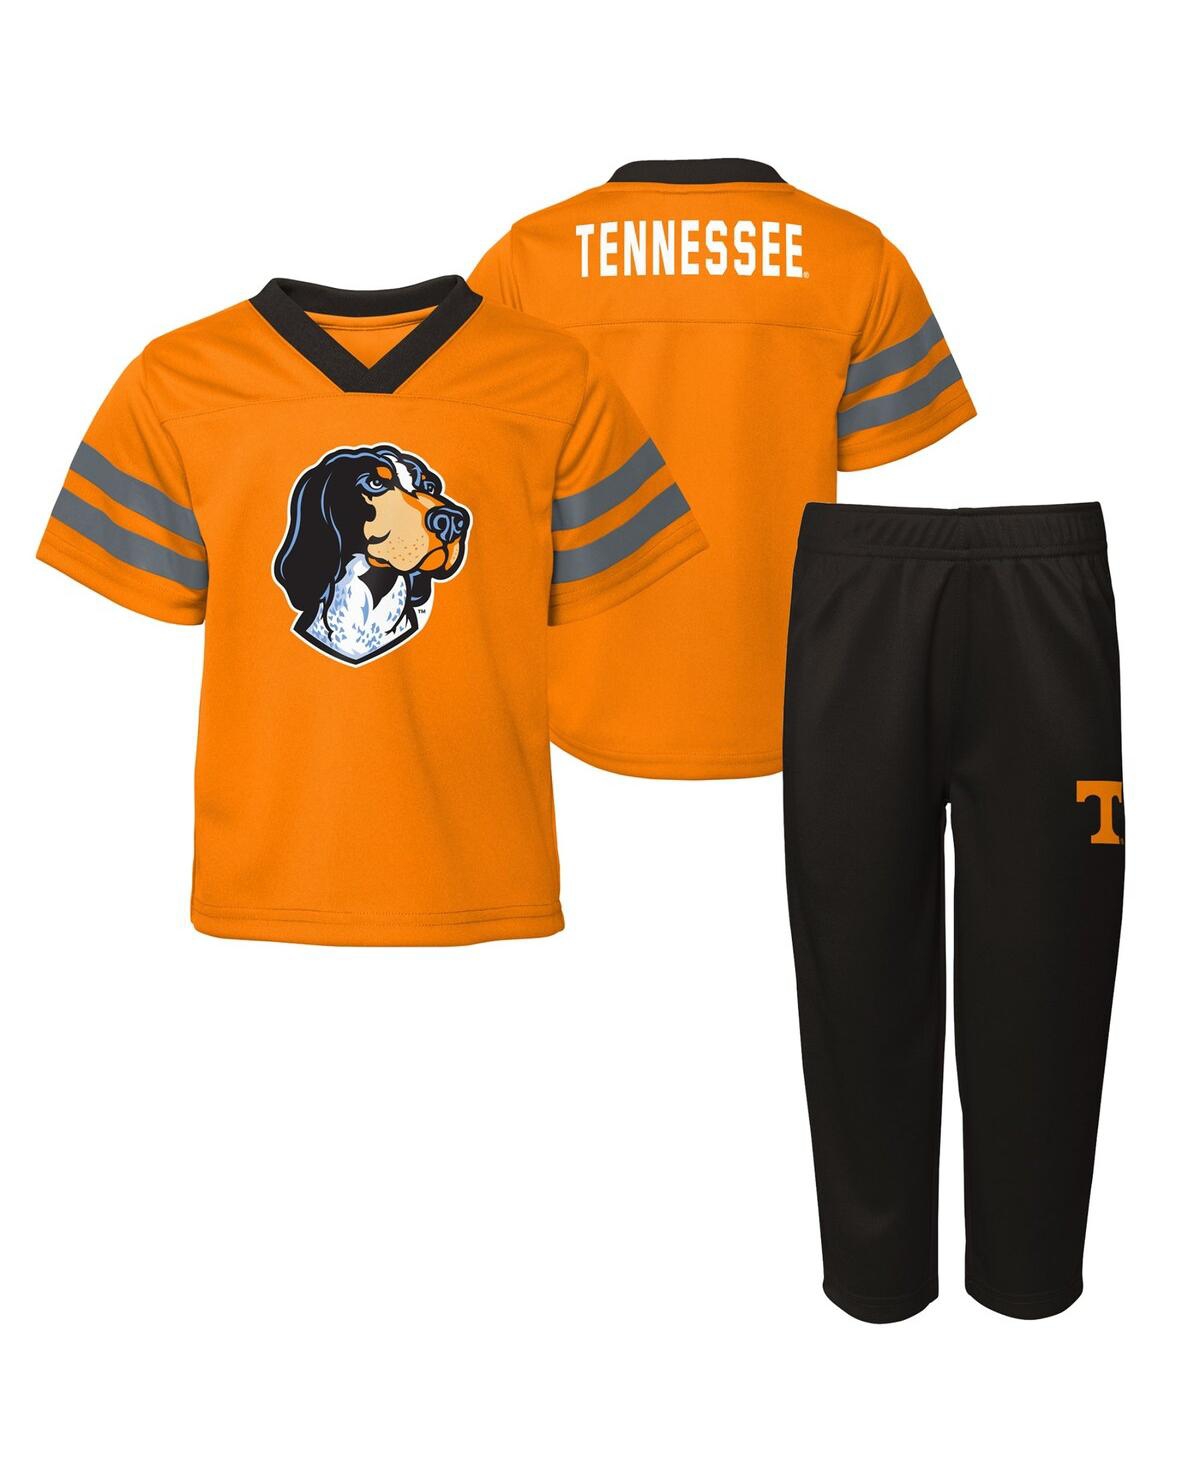 Outerstuff Babies' Infant Boys And Girls Tennessee Orange Tennessee Volunteers Two-piece Red Zone Jersey And Pants Set